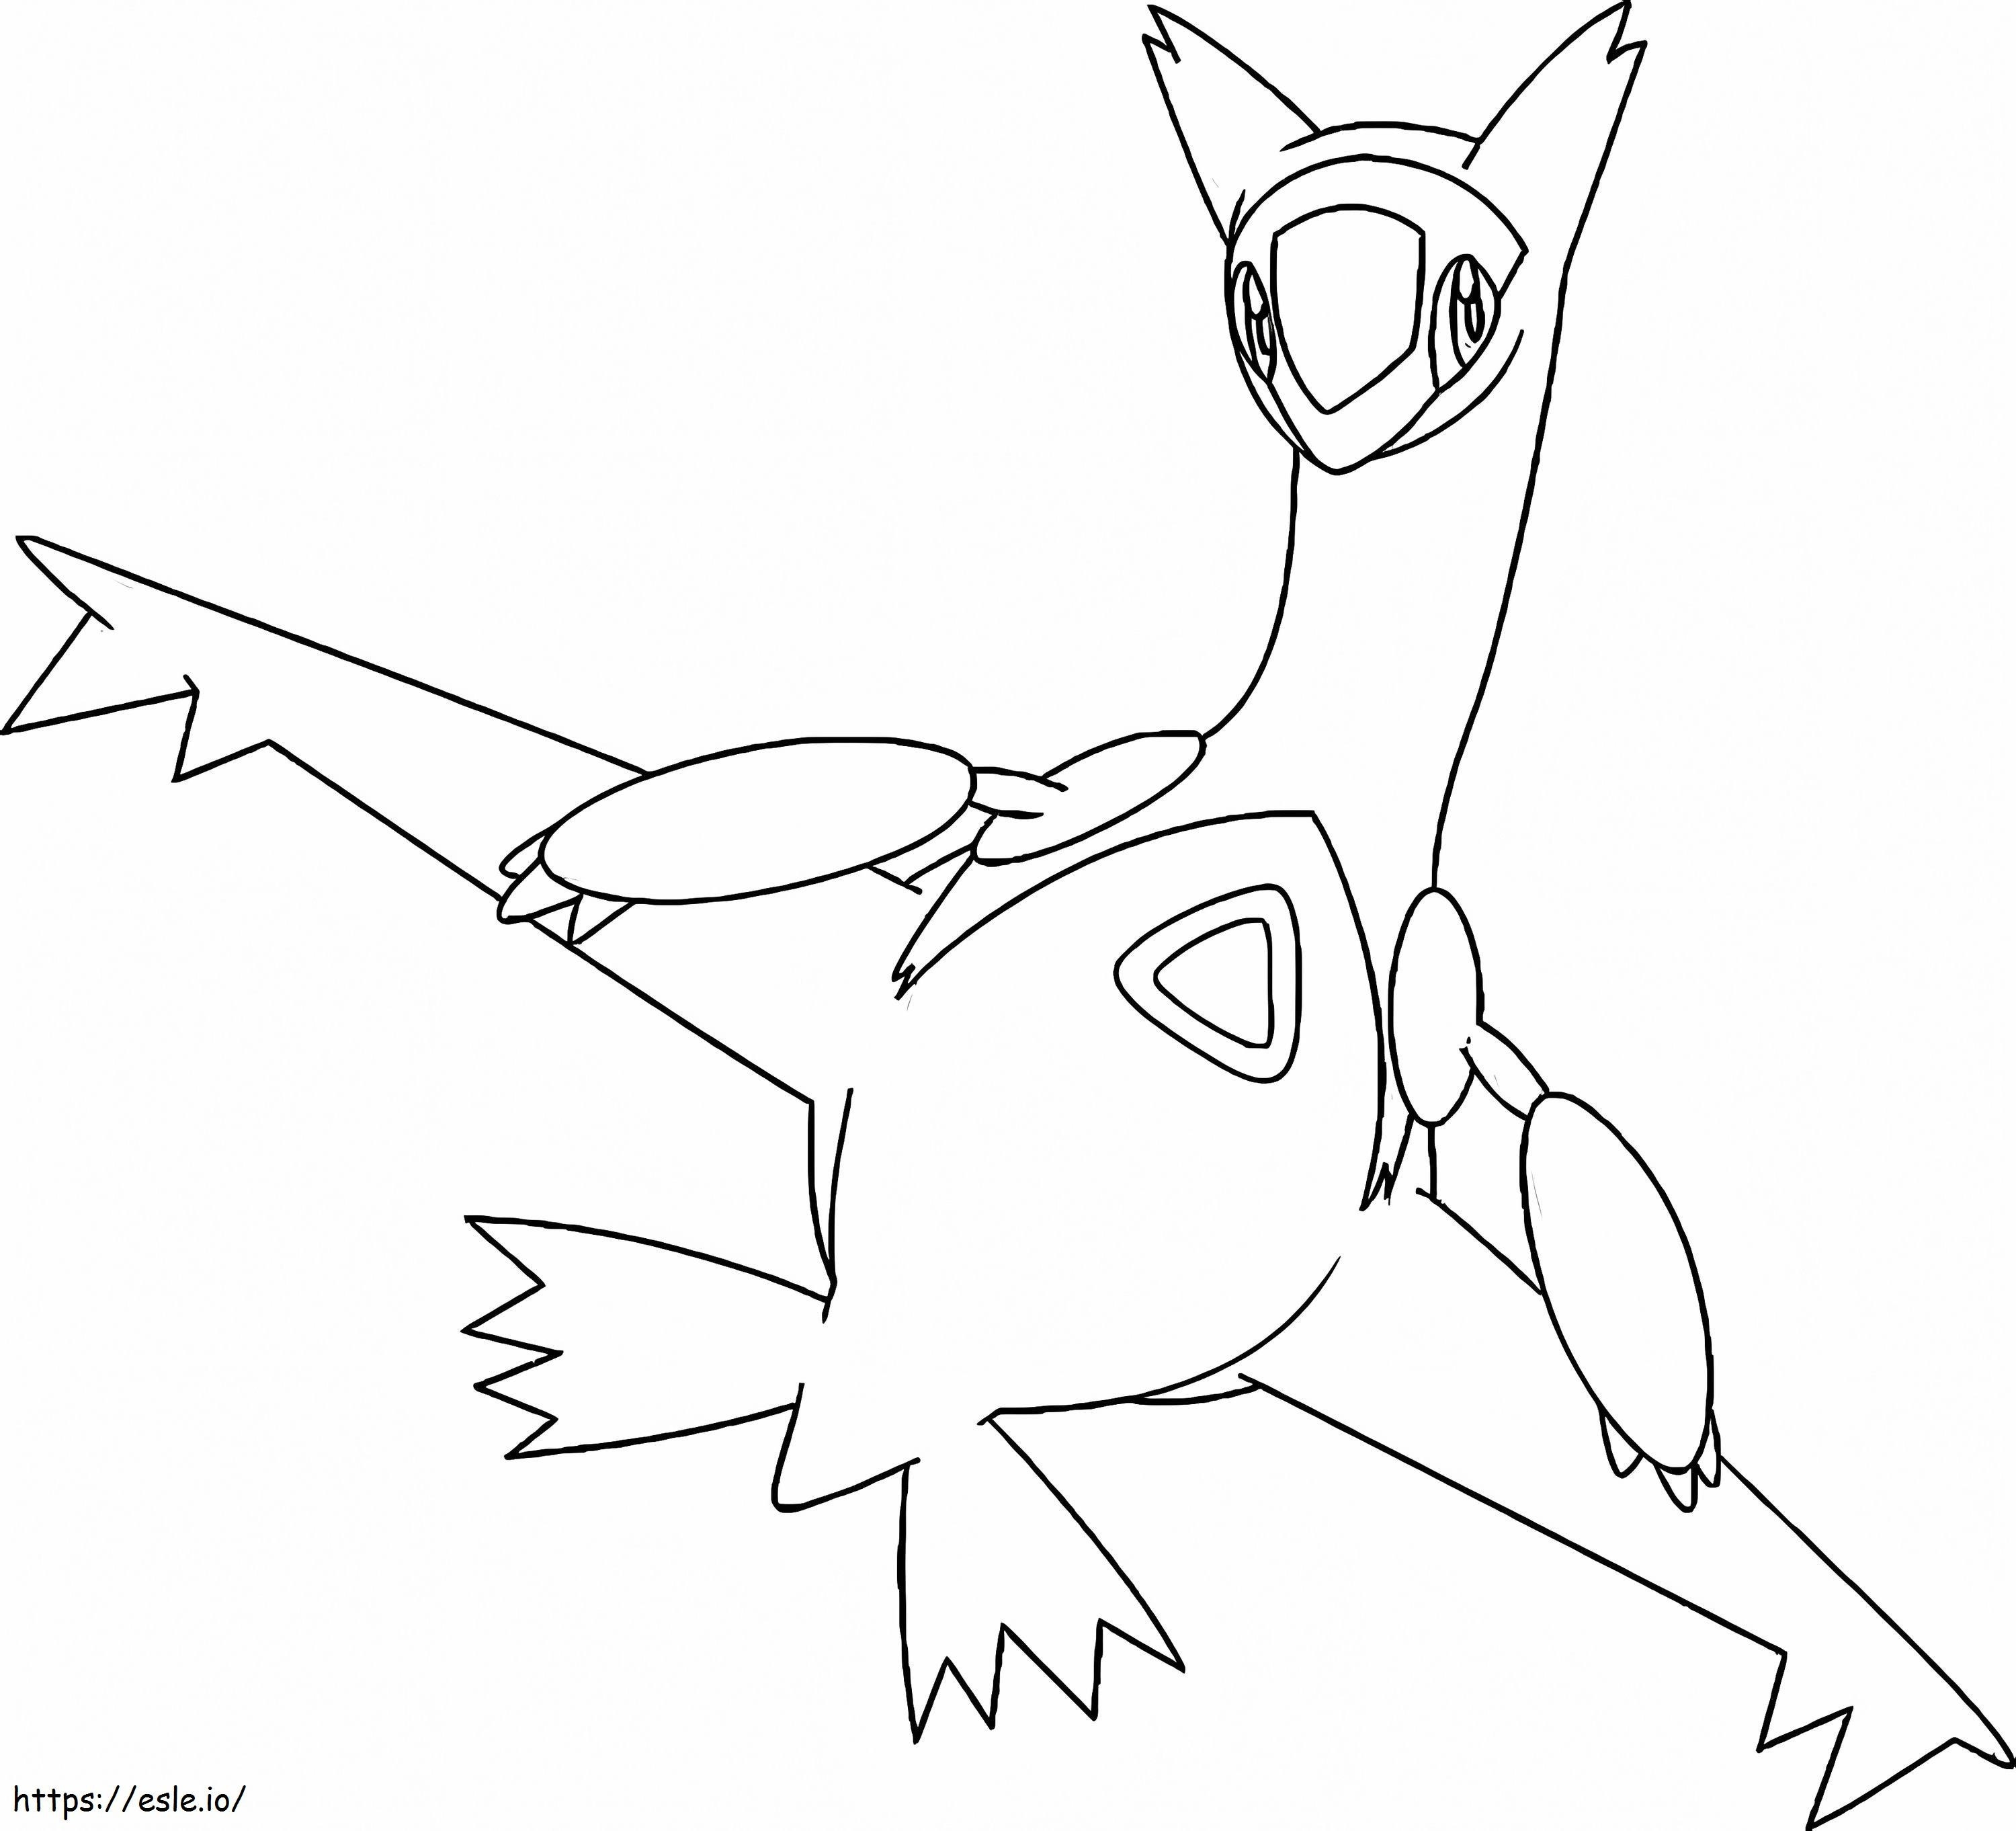 Widths 4 coloring page